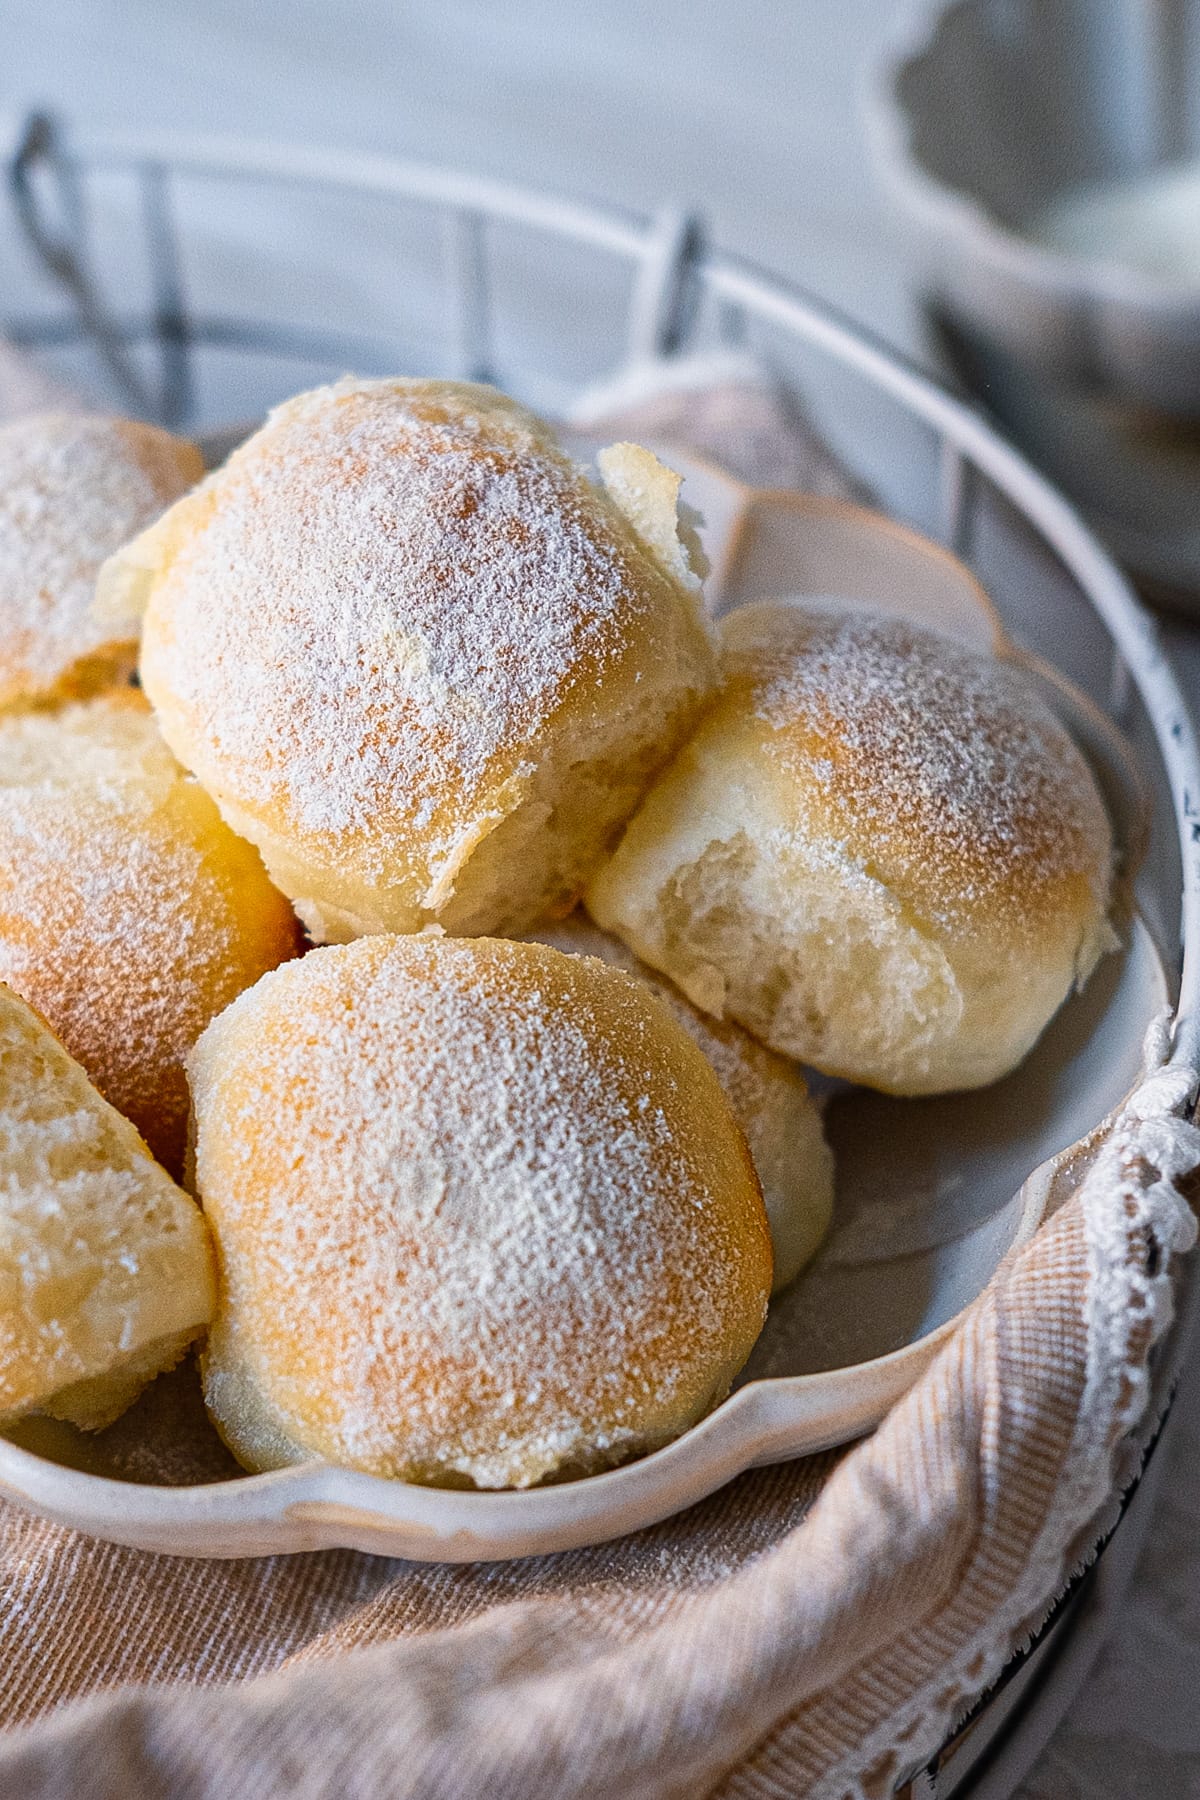 Golden-brown exterior and soft, fluffy texture milk buns in a bowl. 